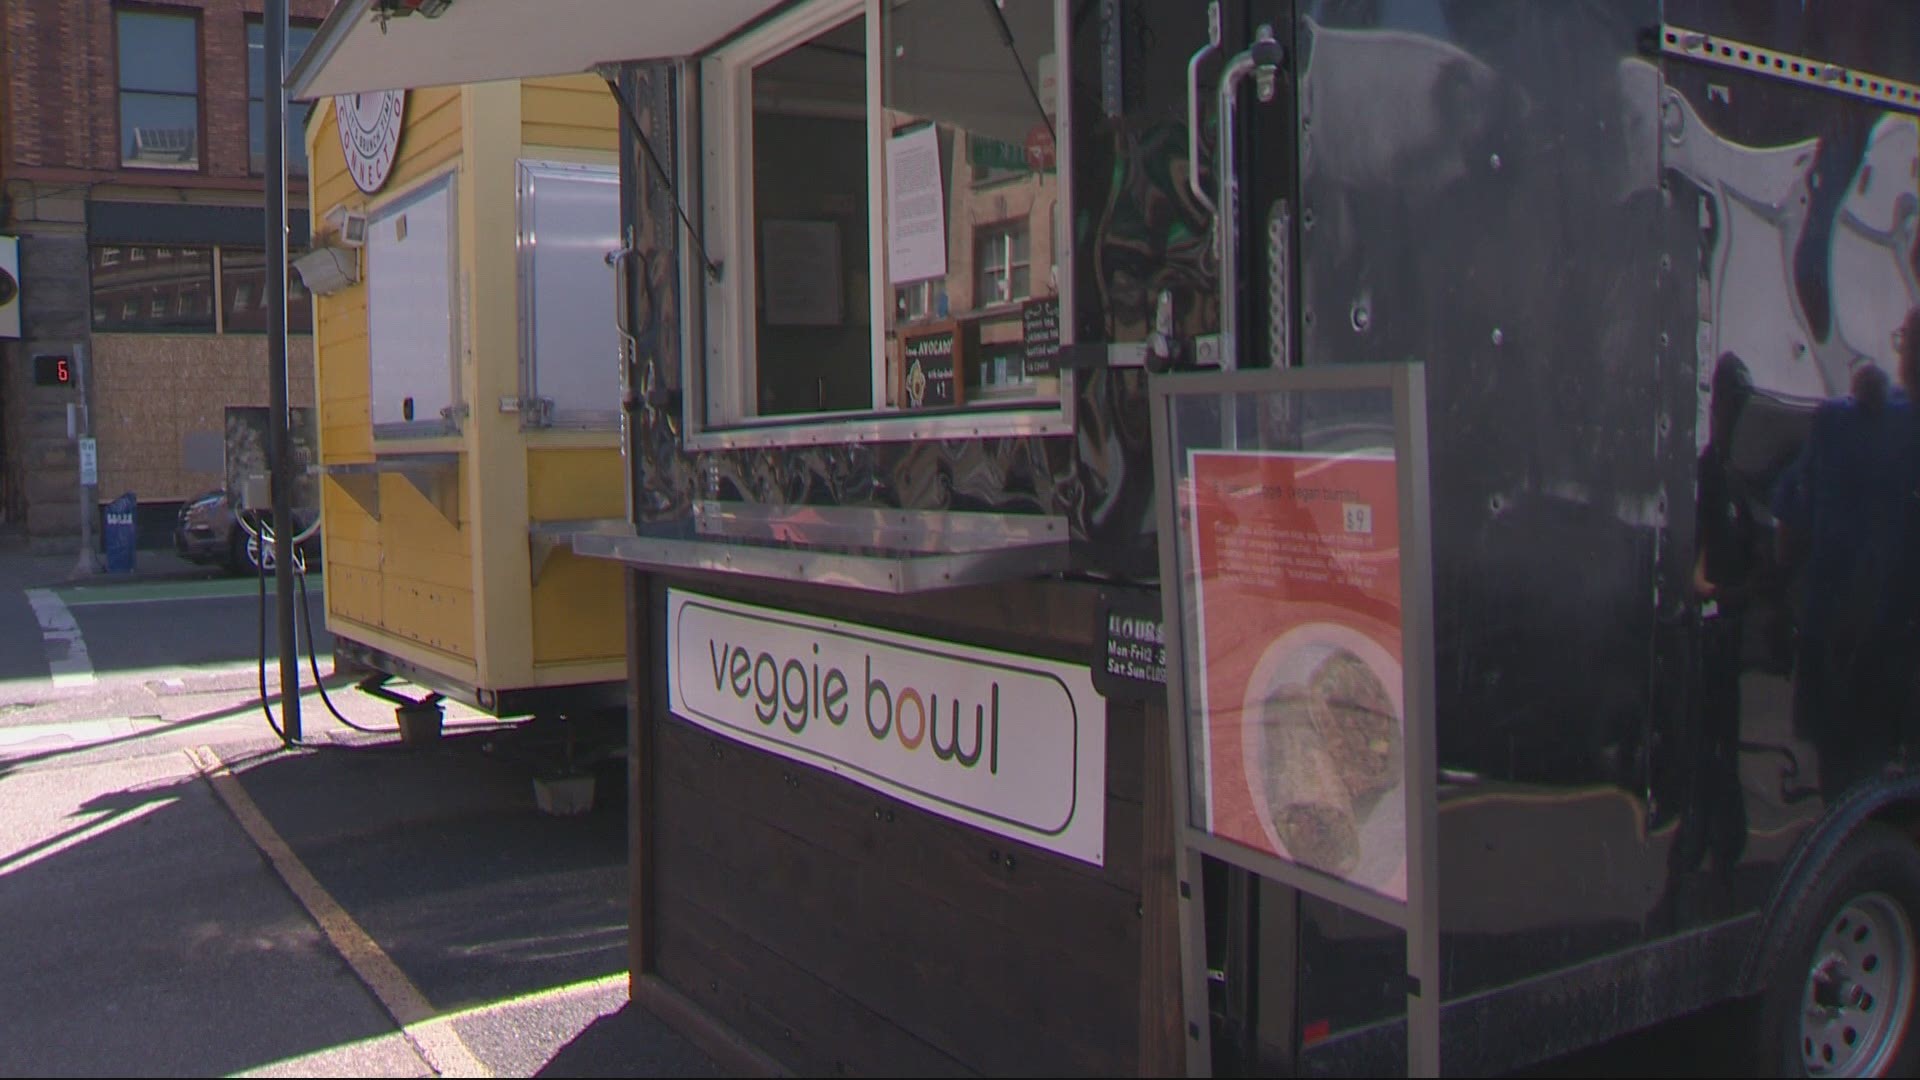 The owner of Veggie Bowl food truck said she is closing down at the end of the week partly because of recently burglaries and citywide vandalism.